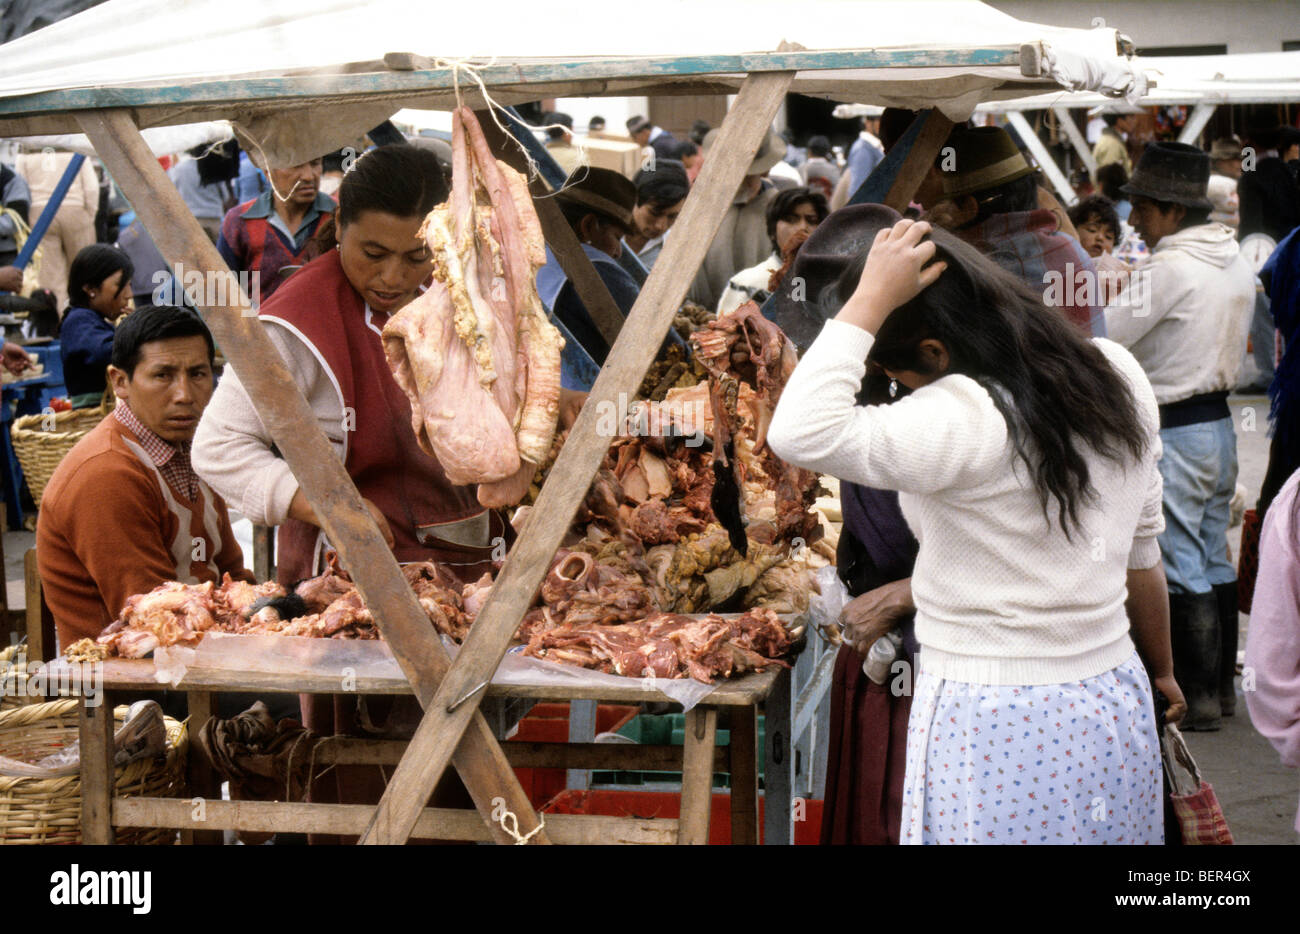 Meat stall.  Small chuncks of unidentifyable raw meat in piles on open market stall. Ecuadorian highland market Stock Photo